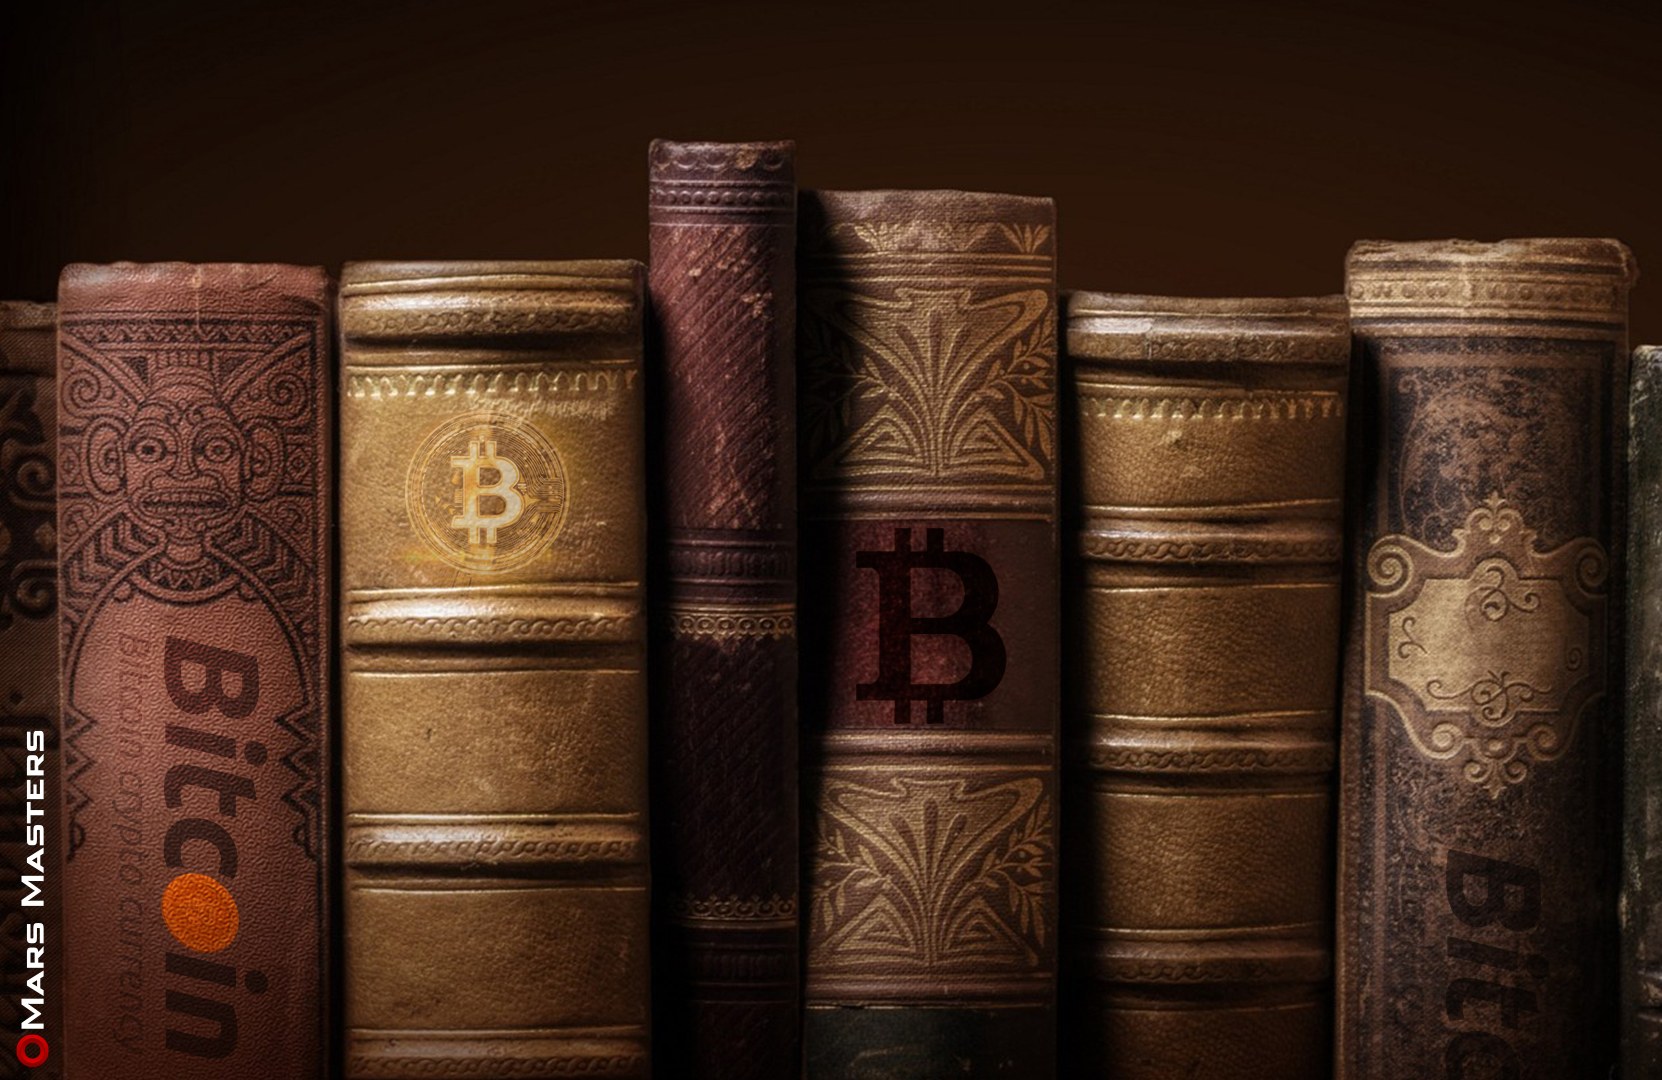 CEO of MicroStrategy to publish the first Bitcoin 'playbook' for businesses in the world